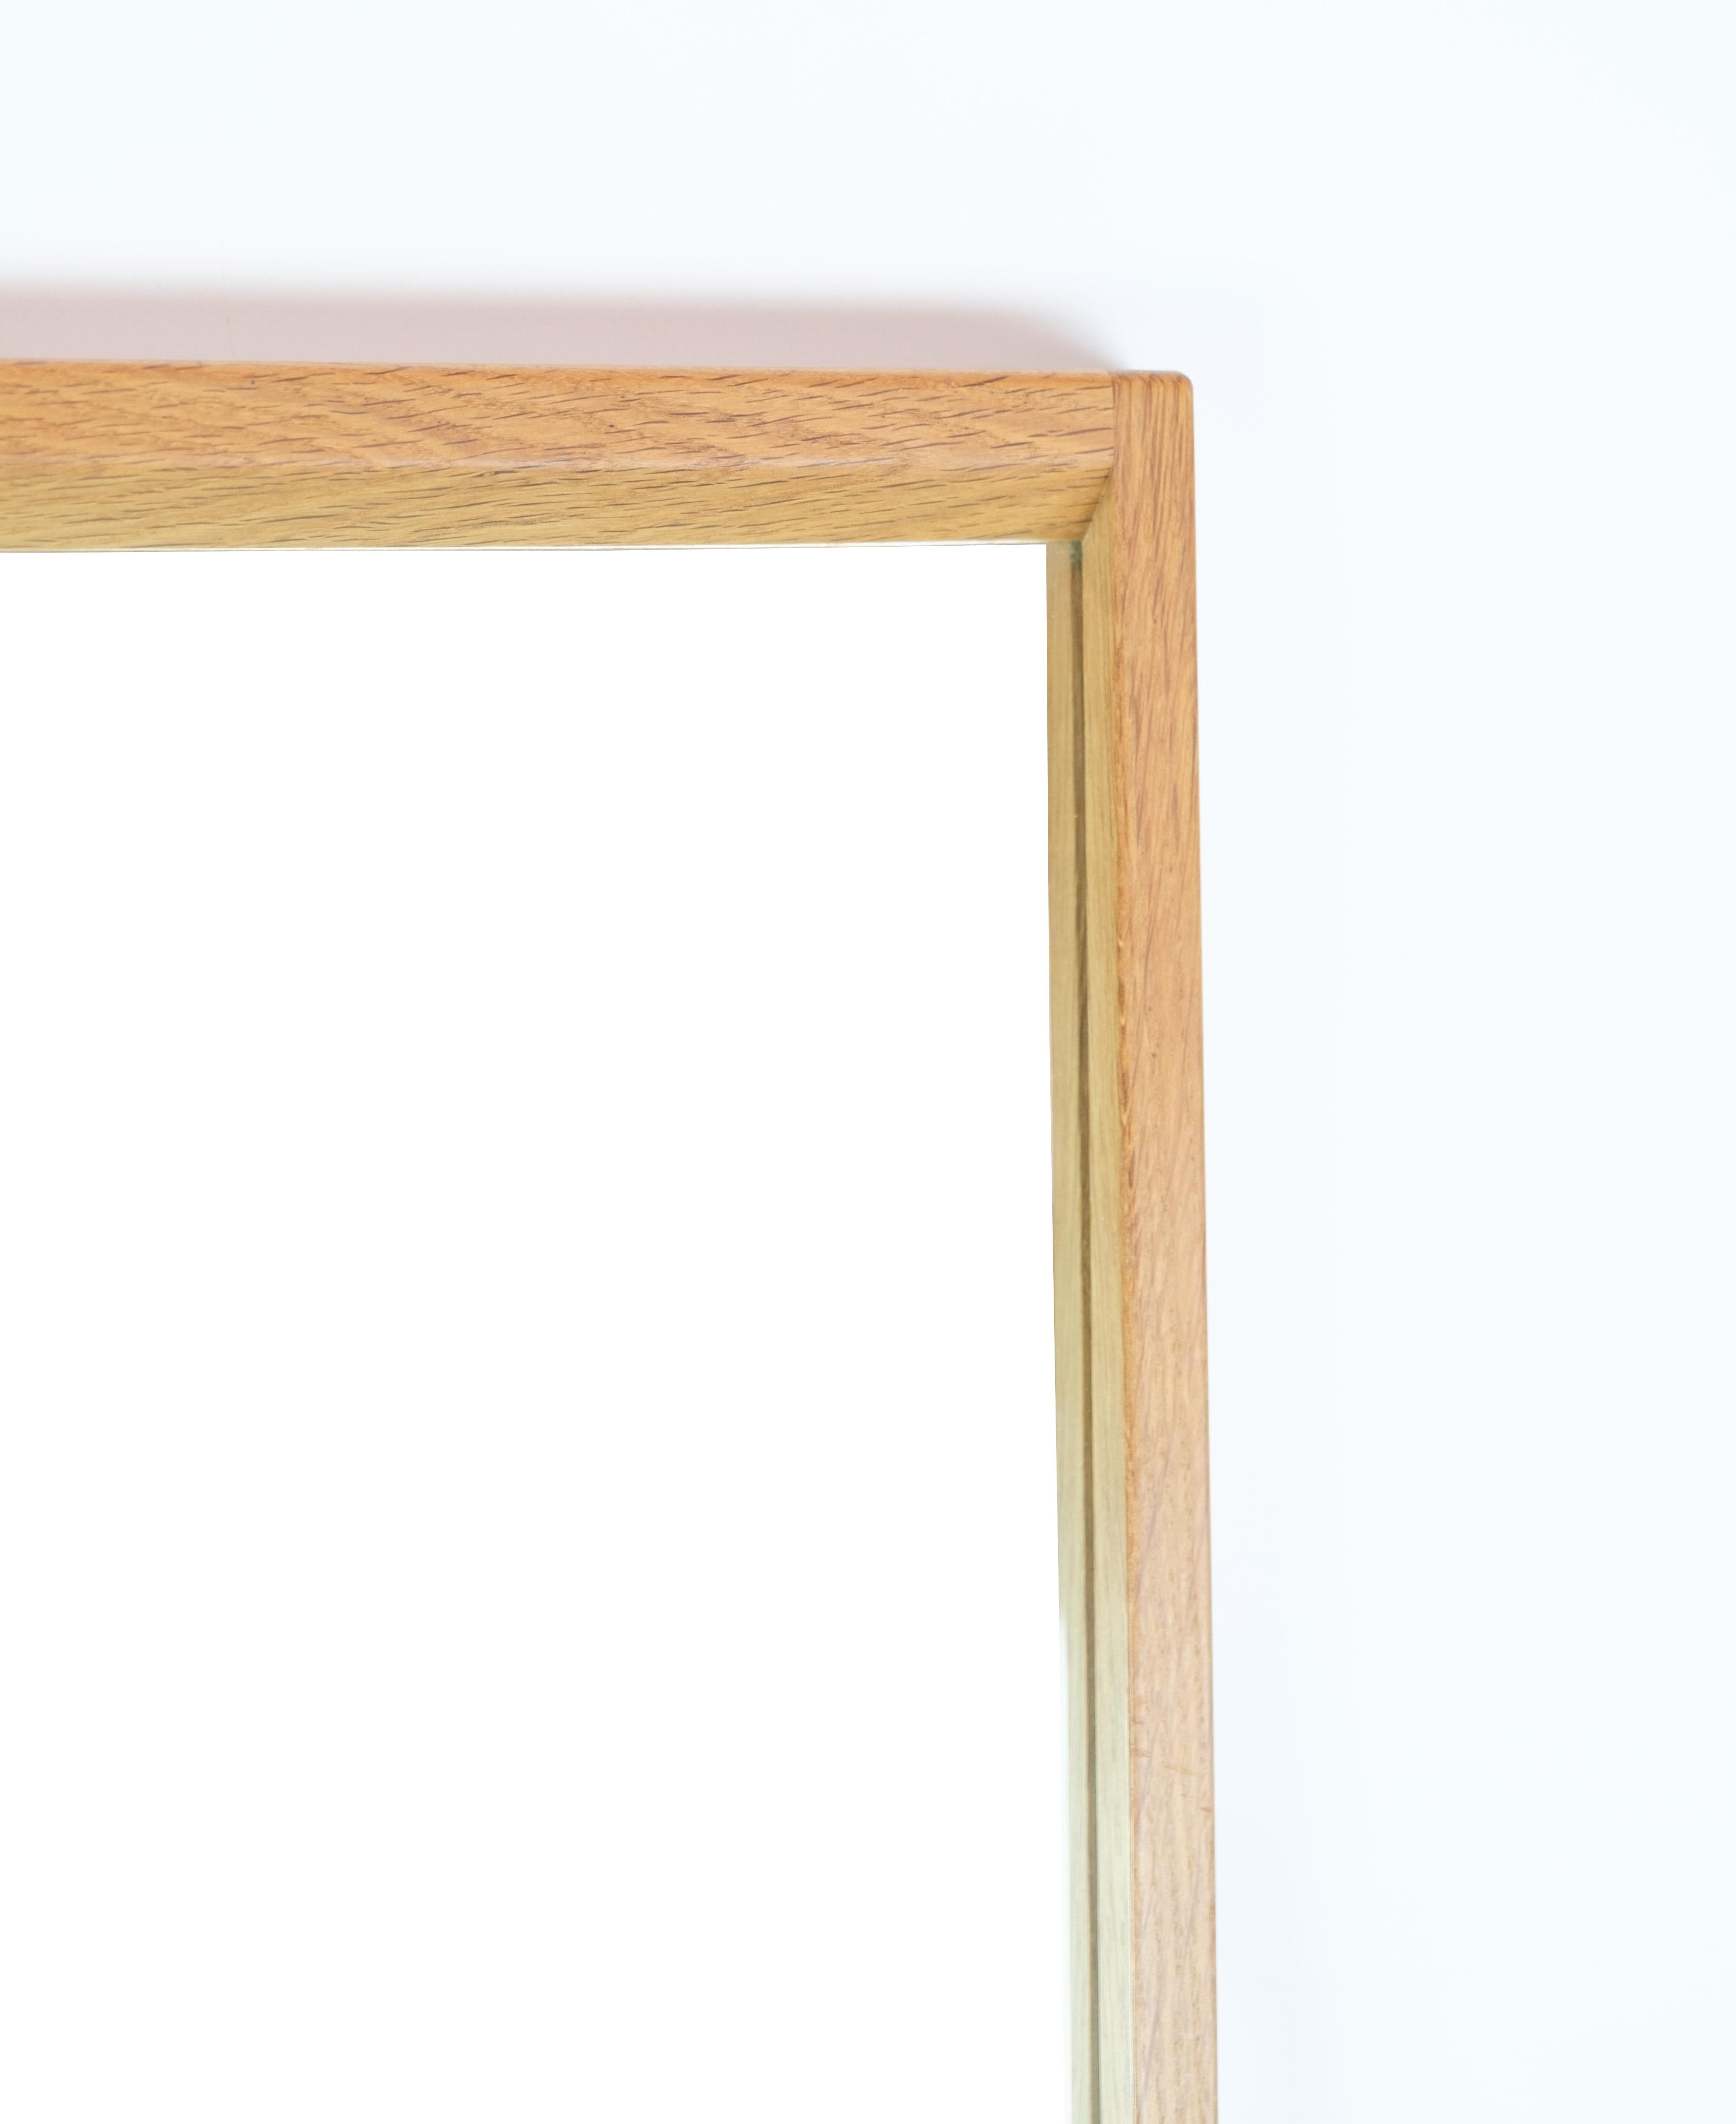 Oblong oak mirror, designed by Aksel Kjaersgaard at Odder møbler from the 1960s.
Dimensions in cm: H: 104 W: 41
This product will be inspected thoroughly at our professional workshop by our educated employees, who assure the product quality